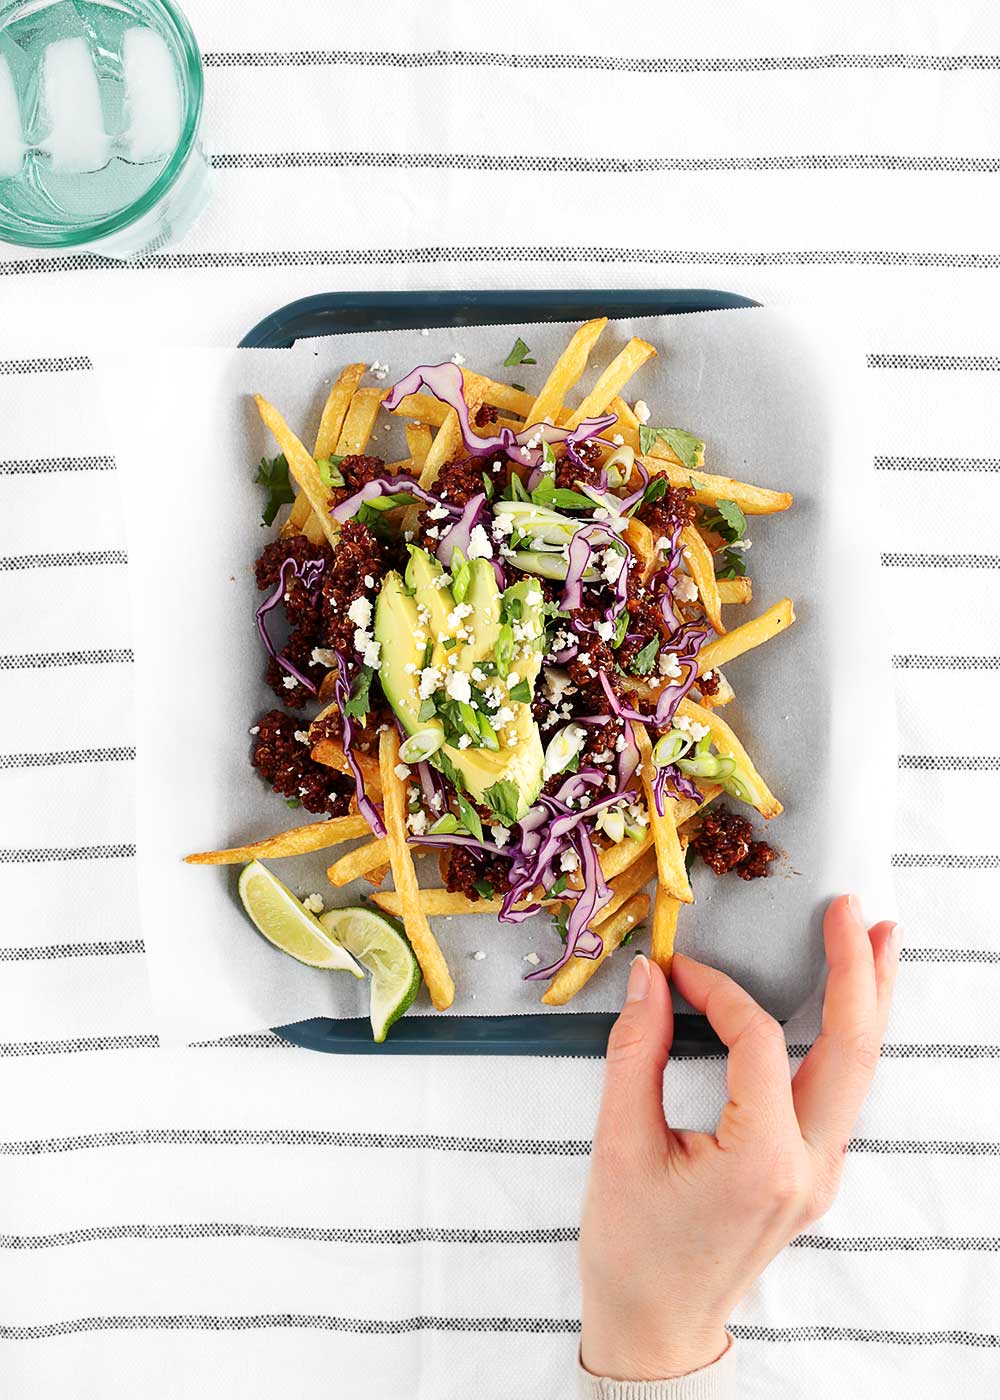 Vegetarian Chili Cheese Fries from The Fauxmartha